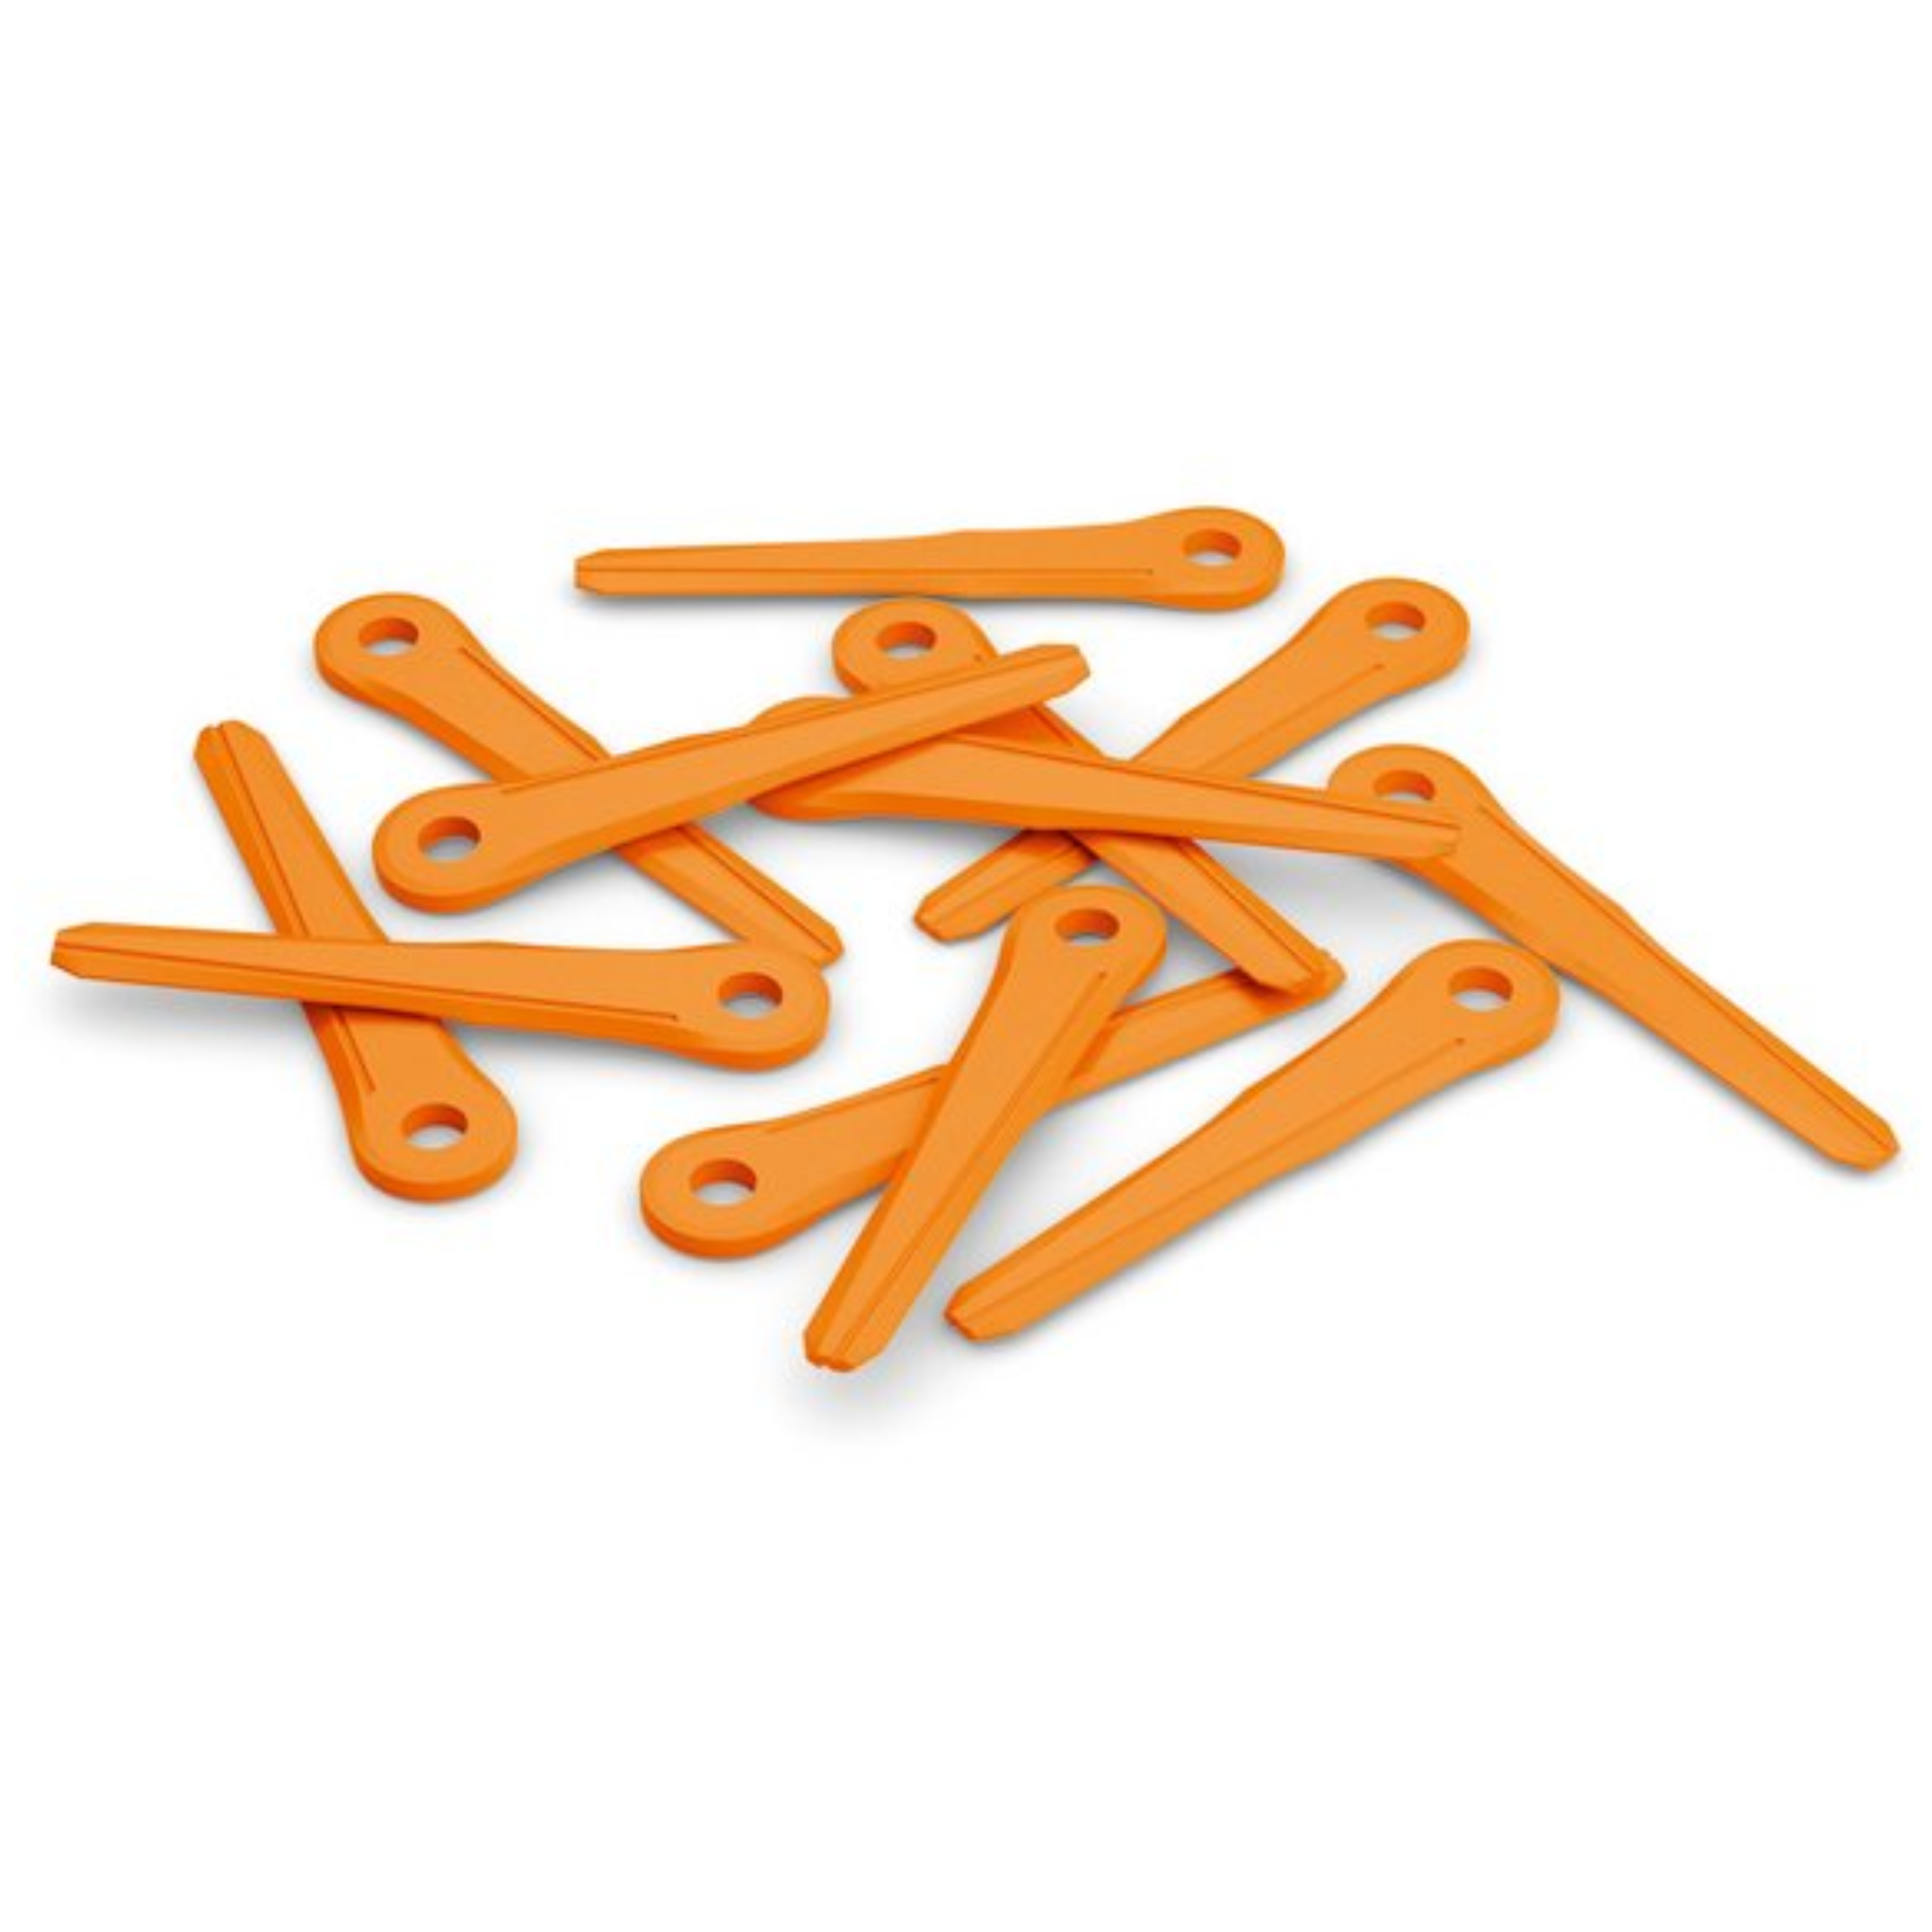 Stihl 5.7in Orange Plastic Replacement Blade For PolyCut Head 12pk | 4002 007 1000